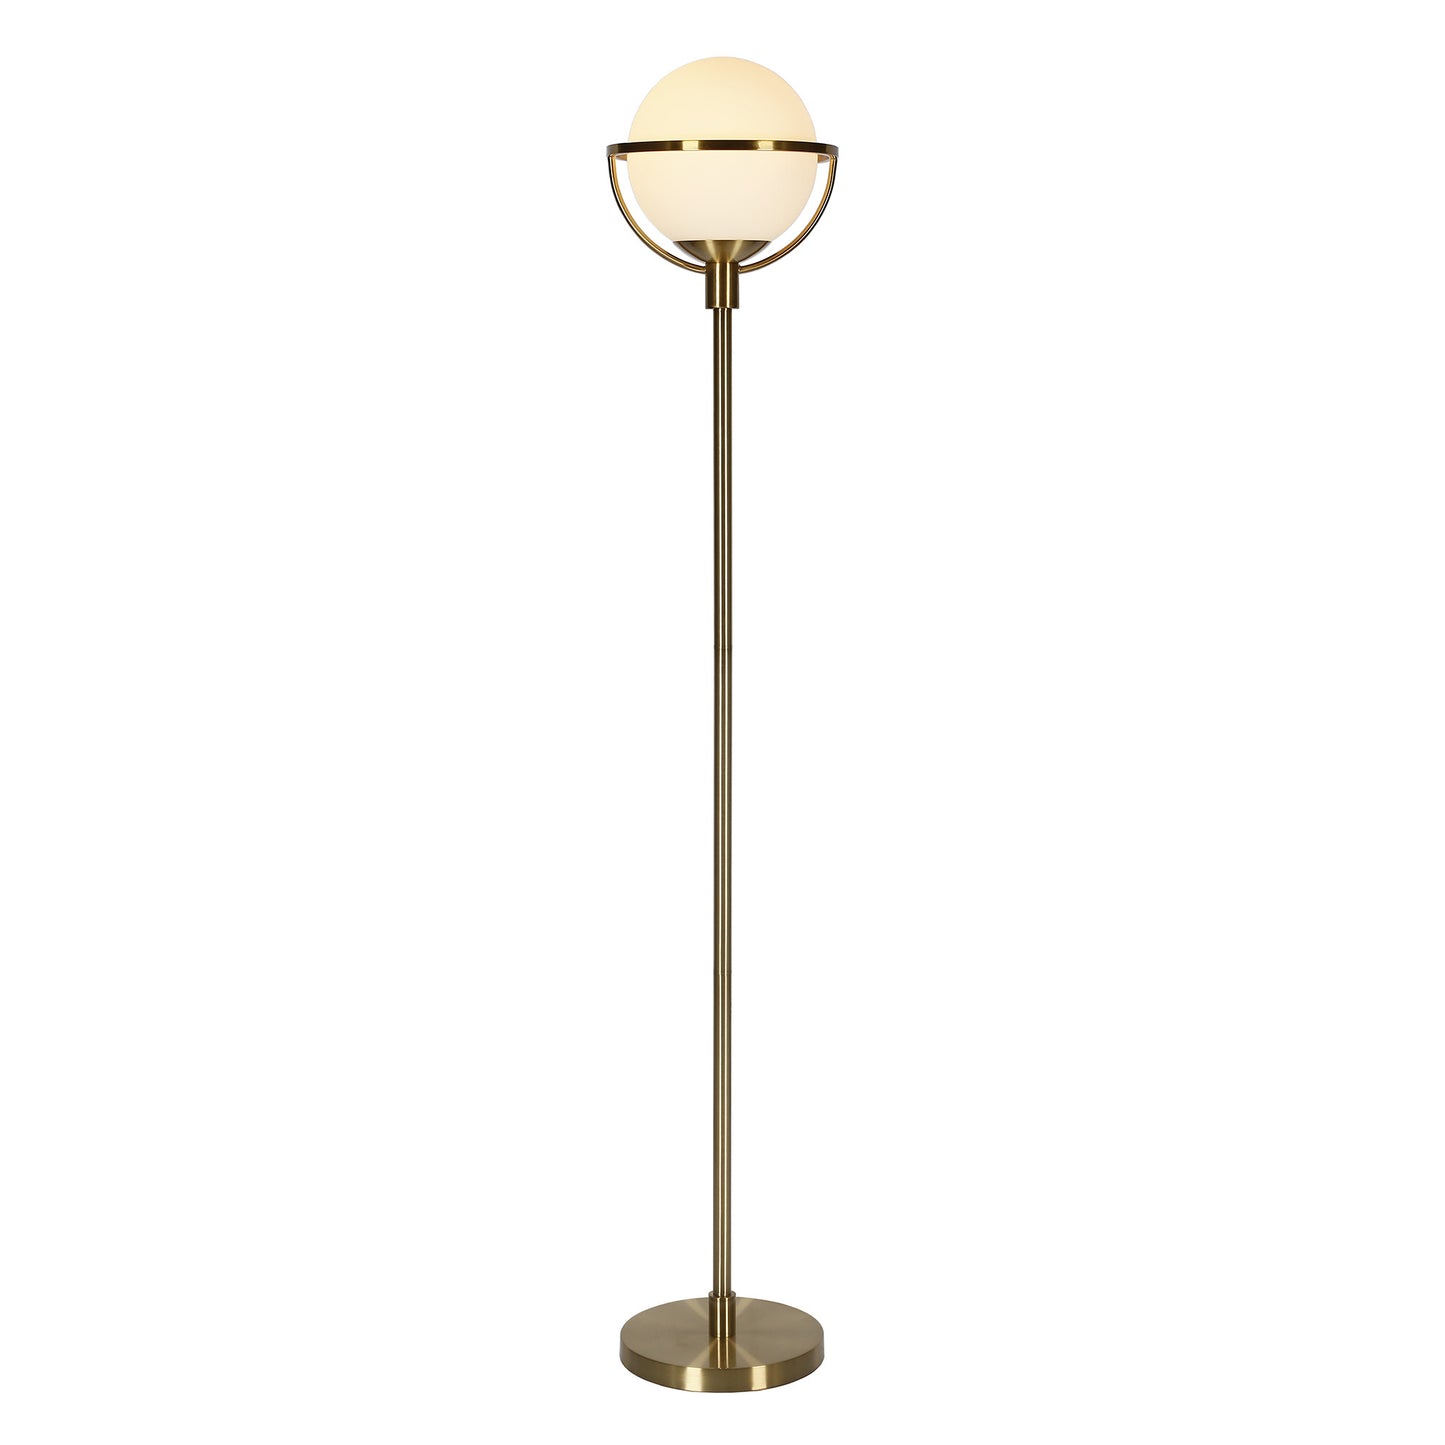 68" Brass Novelty Floor Lamp With White Frosted Glass Globe Shade